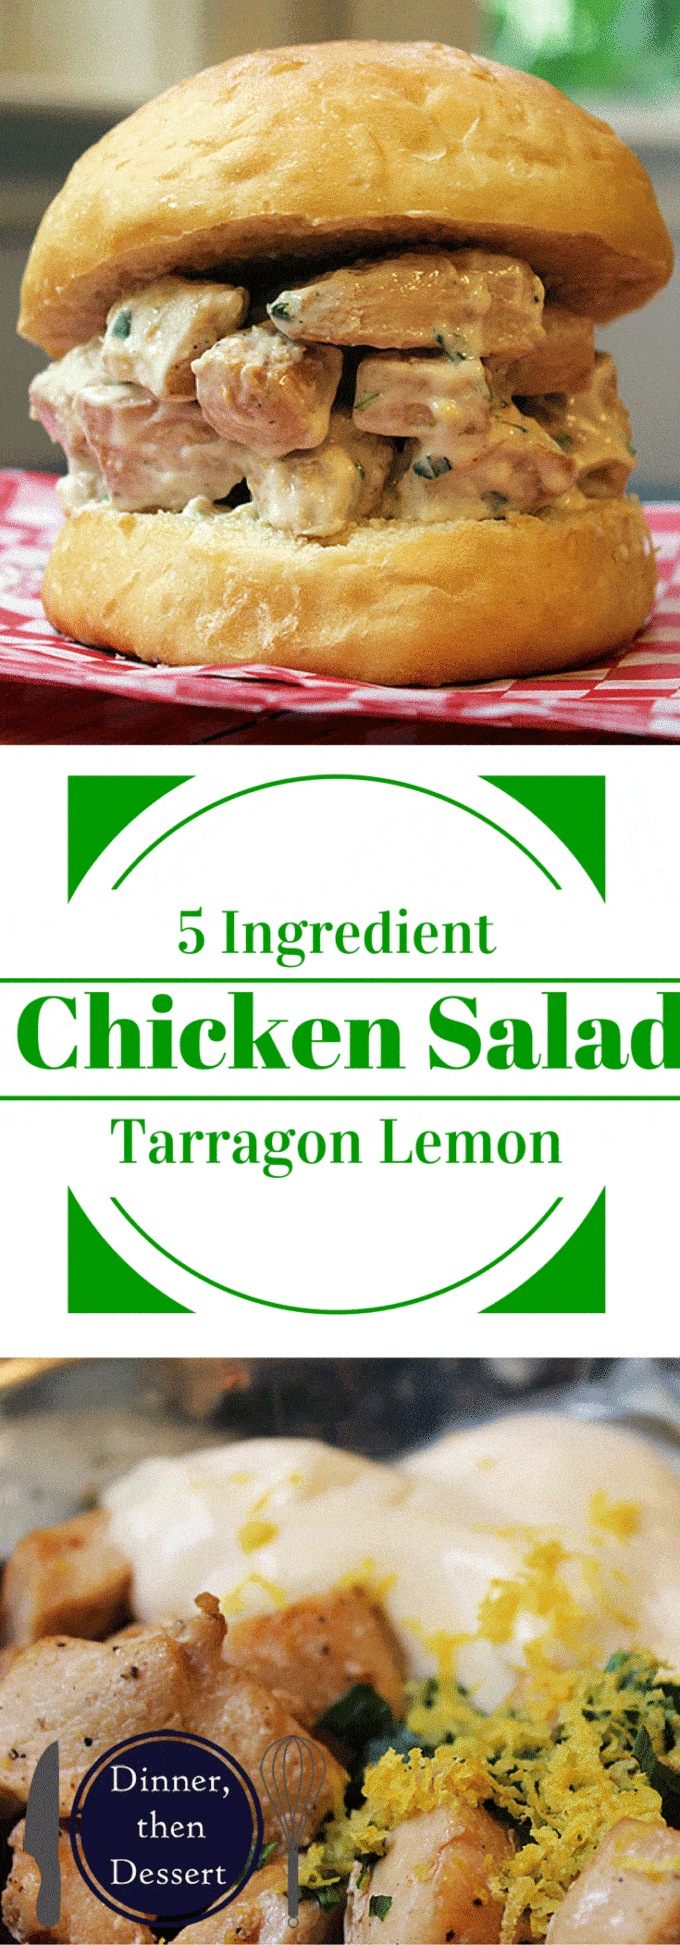 5 Ingredient Tarragon Lemon Chicken Salad Sandwiches are an easy delicious cold chicken sandwich perfect for a picnic or beach day! Refreshing lemon tarragon dressing!